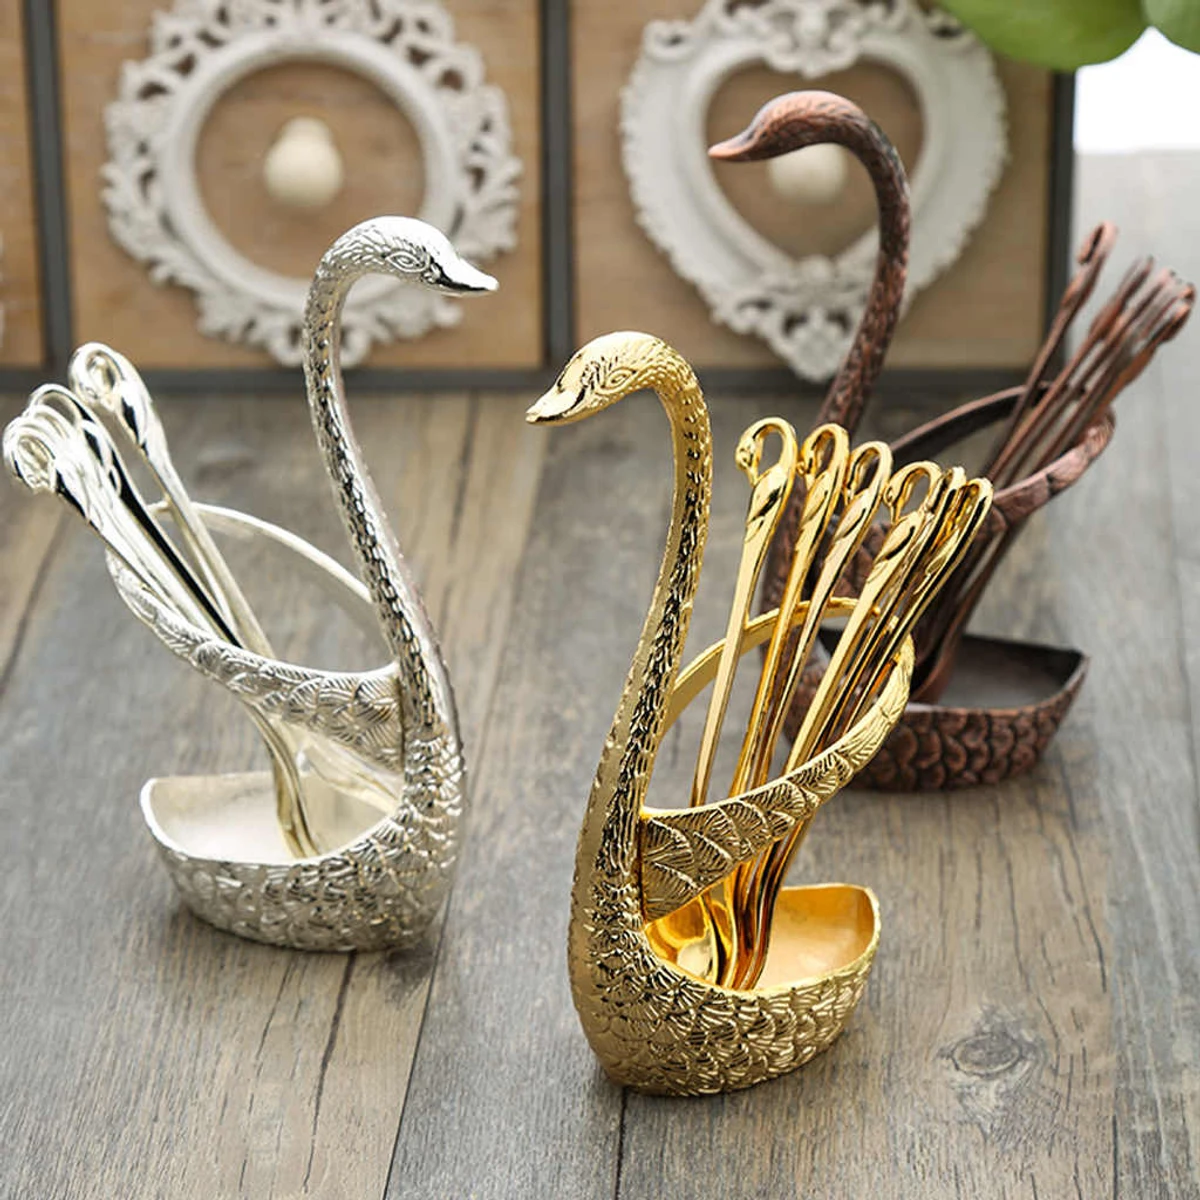 Coffee Tea Spoon Fork Holder Set Swan Fork Luxurious Fruit Cake Cutlery Living Room Dining Table Kitchen Tableware Accessories